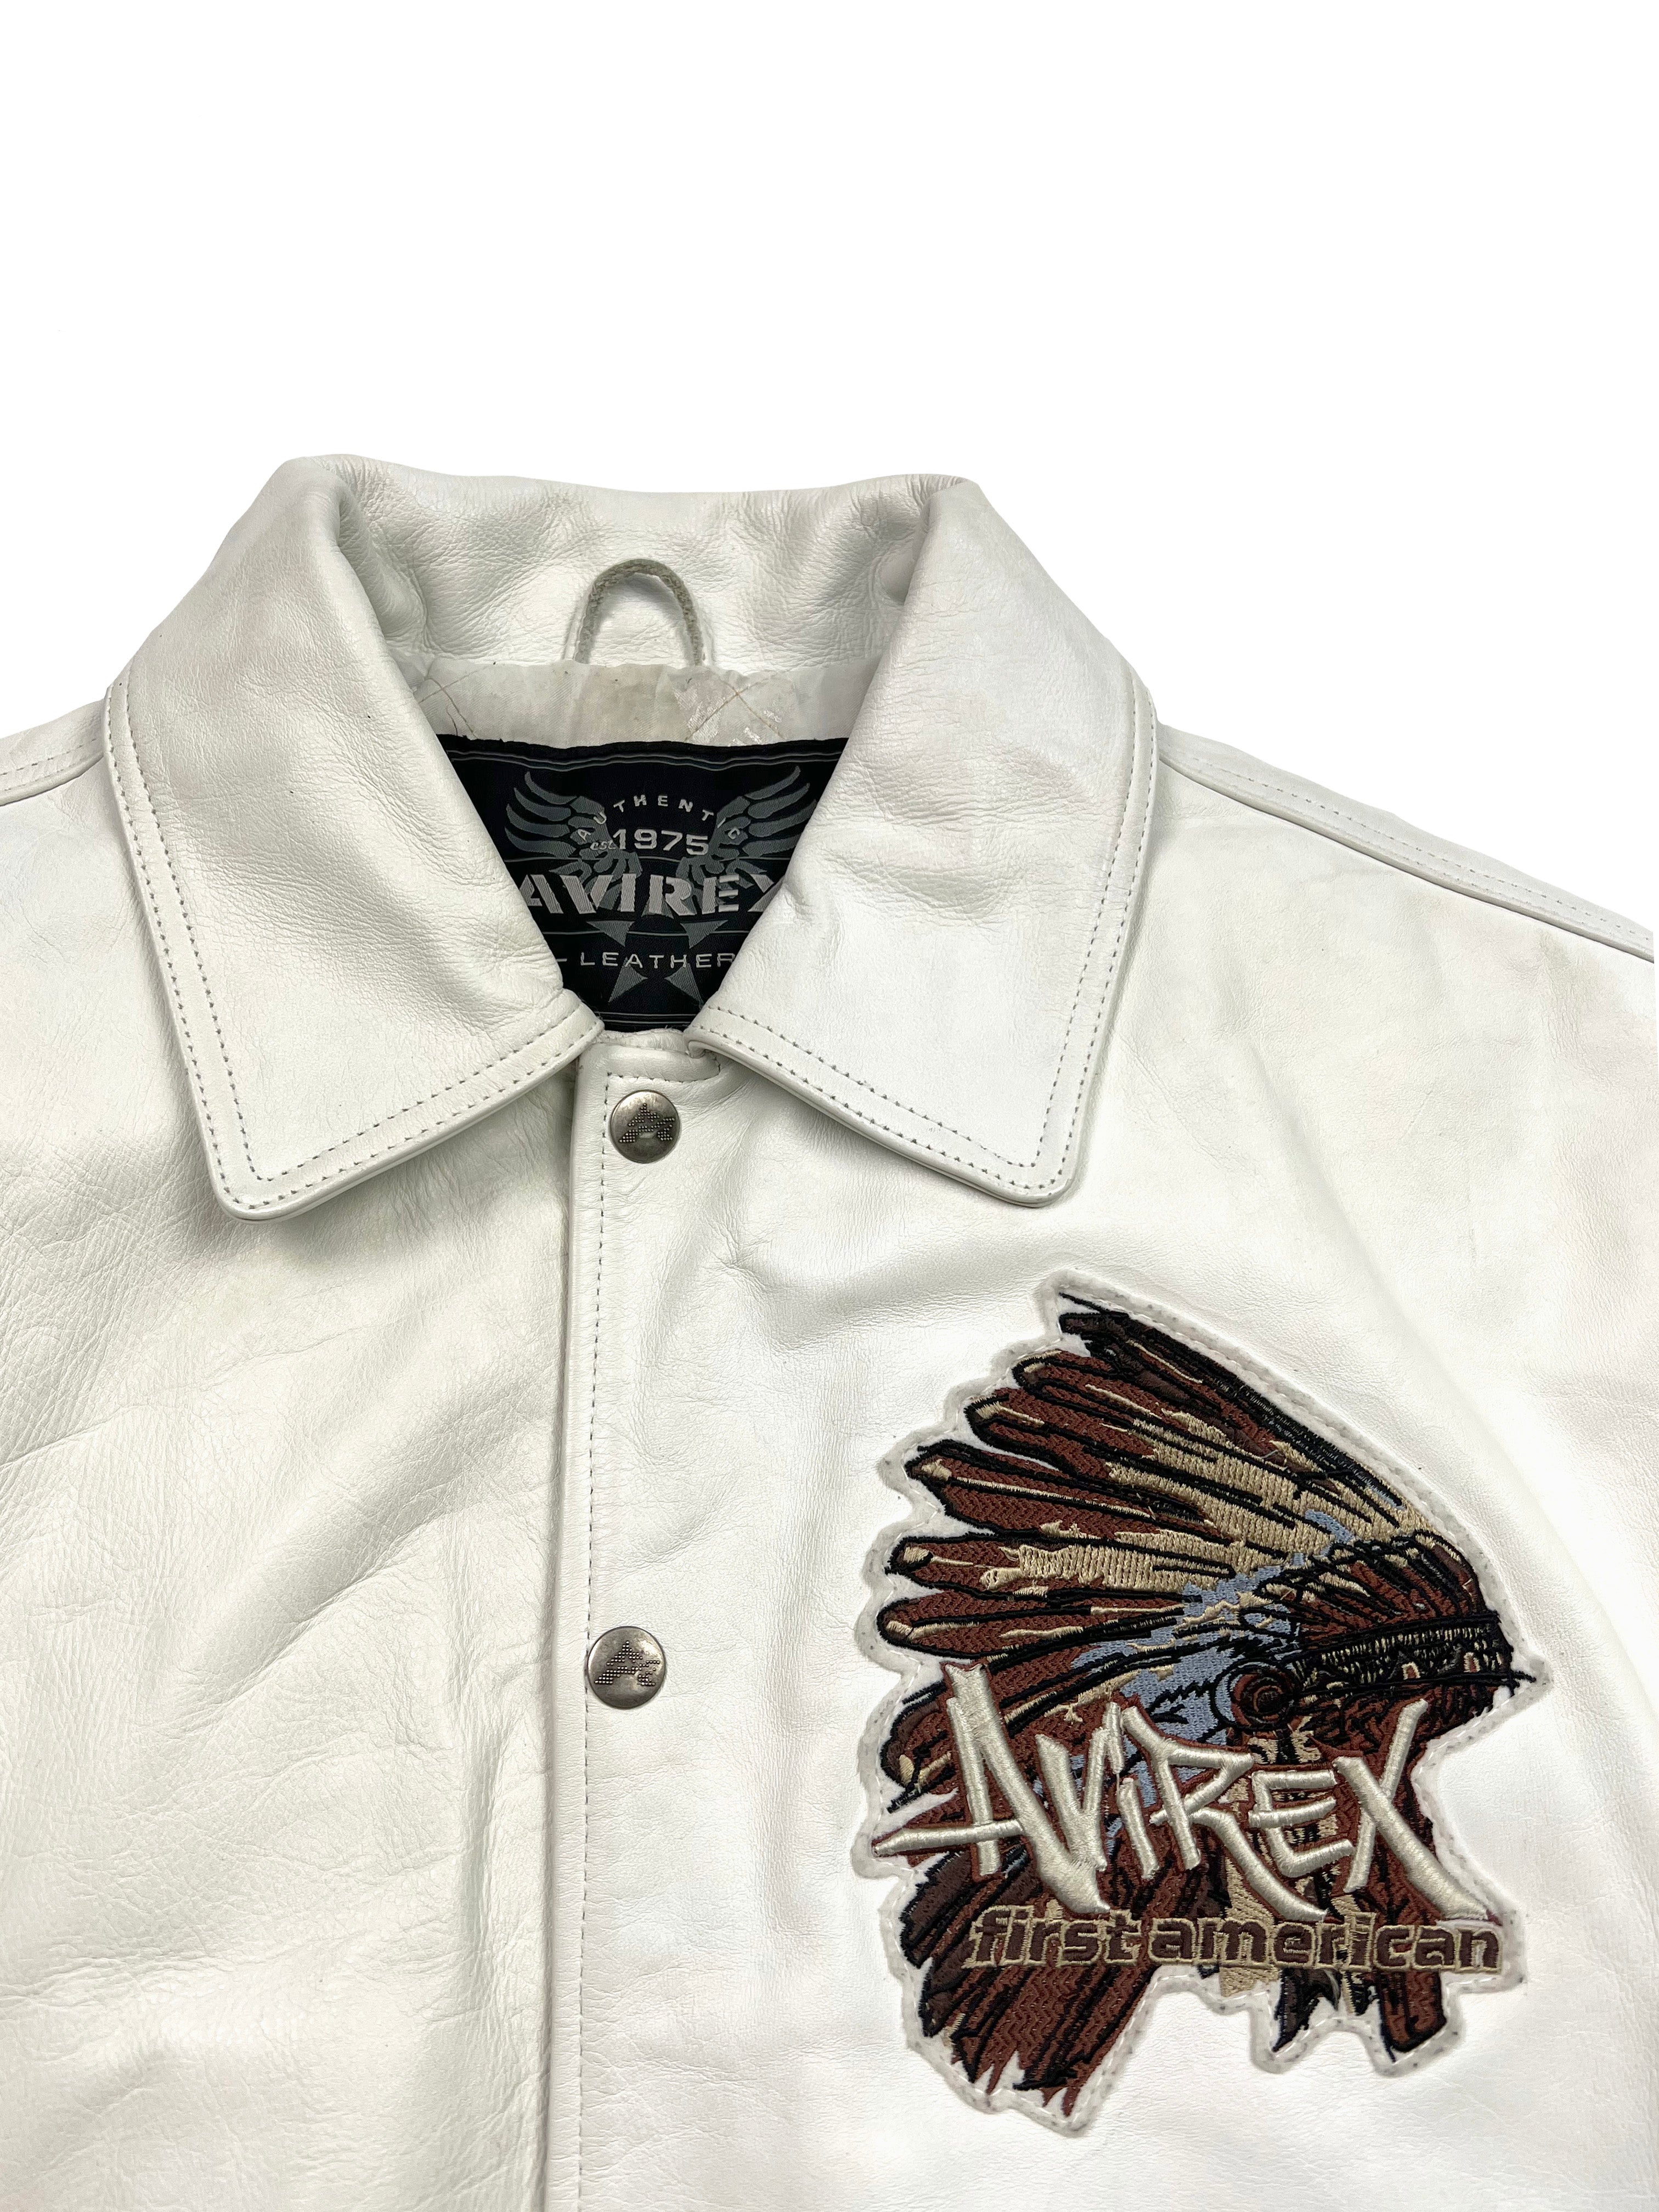 Avirex 'First American' White Leather Jacket 00's